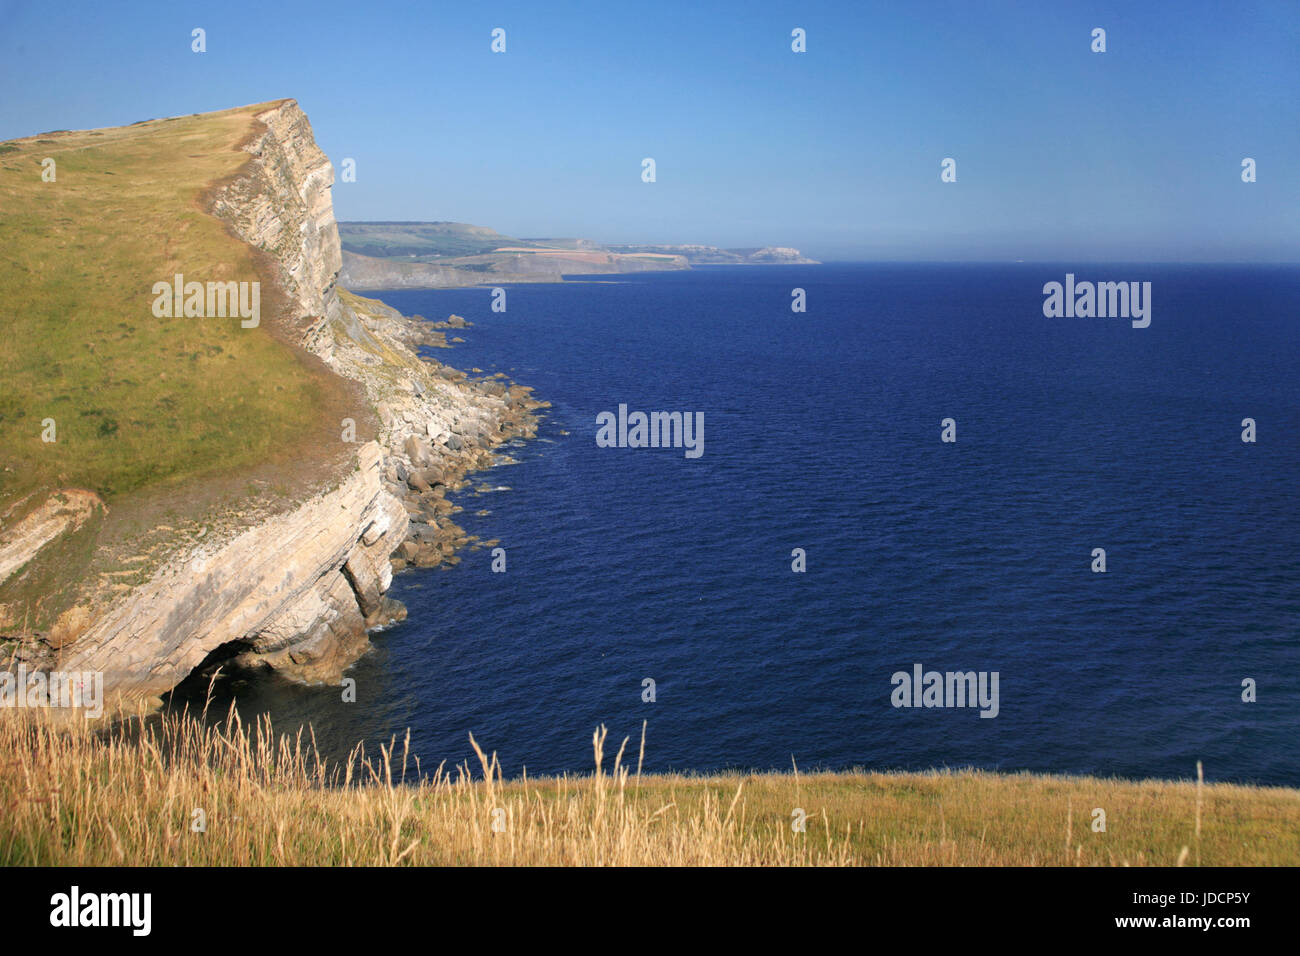 Looking East from Worbarrow Tout, along Gold Down and Gad Cliff, Isle of Purbeck, Dorset: UK: St Aldhelm's (St Alban's) Head in the distance Stock Photo